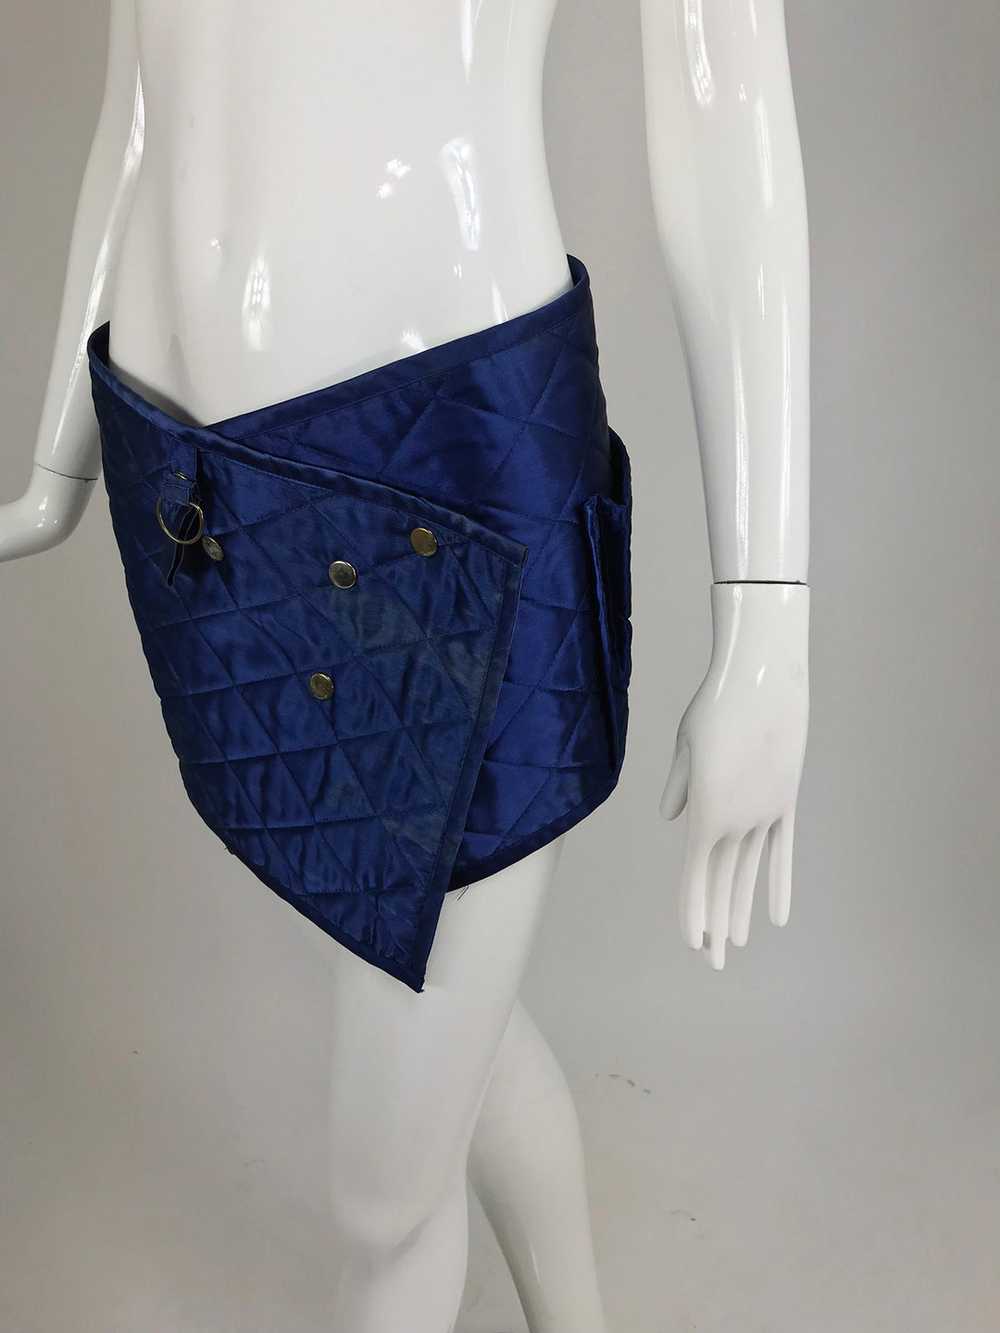 Sonia Rykiel quilted blue satin belt or skirt wit… - image 5